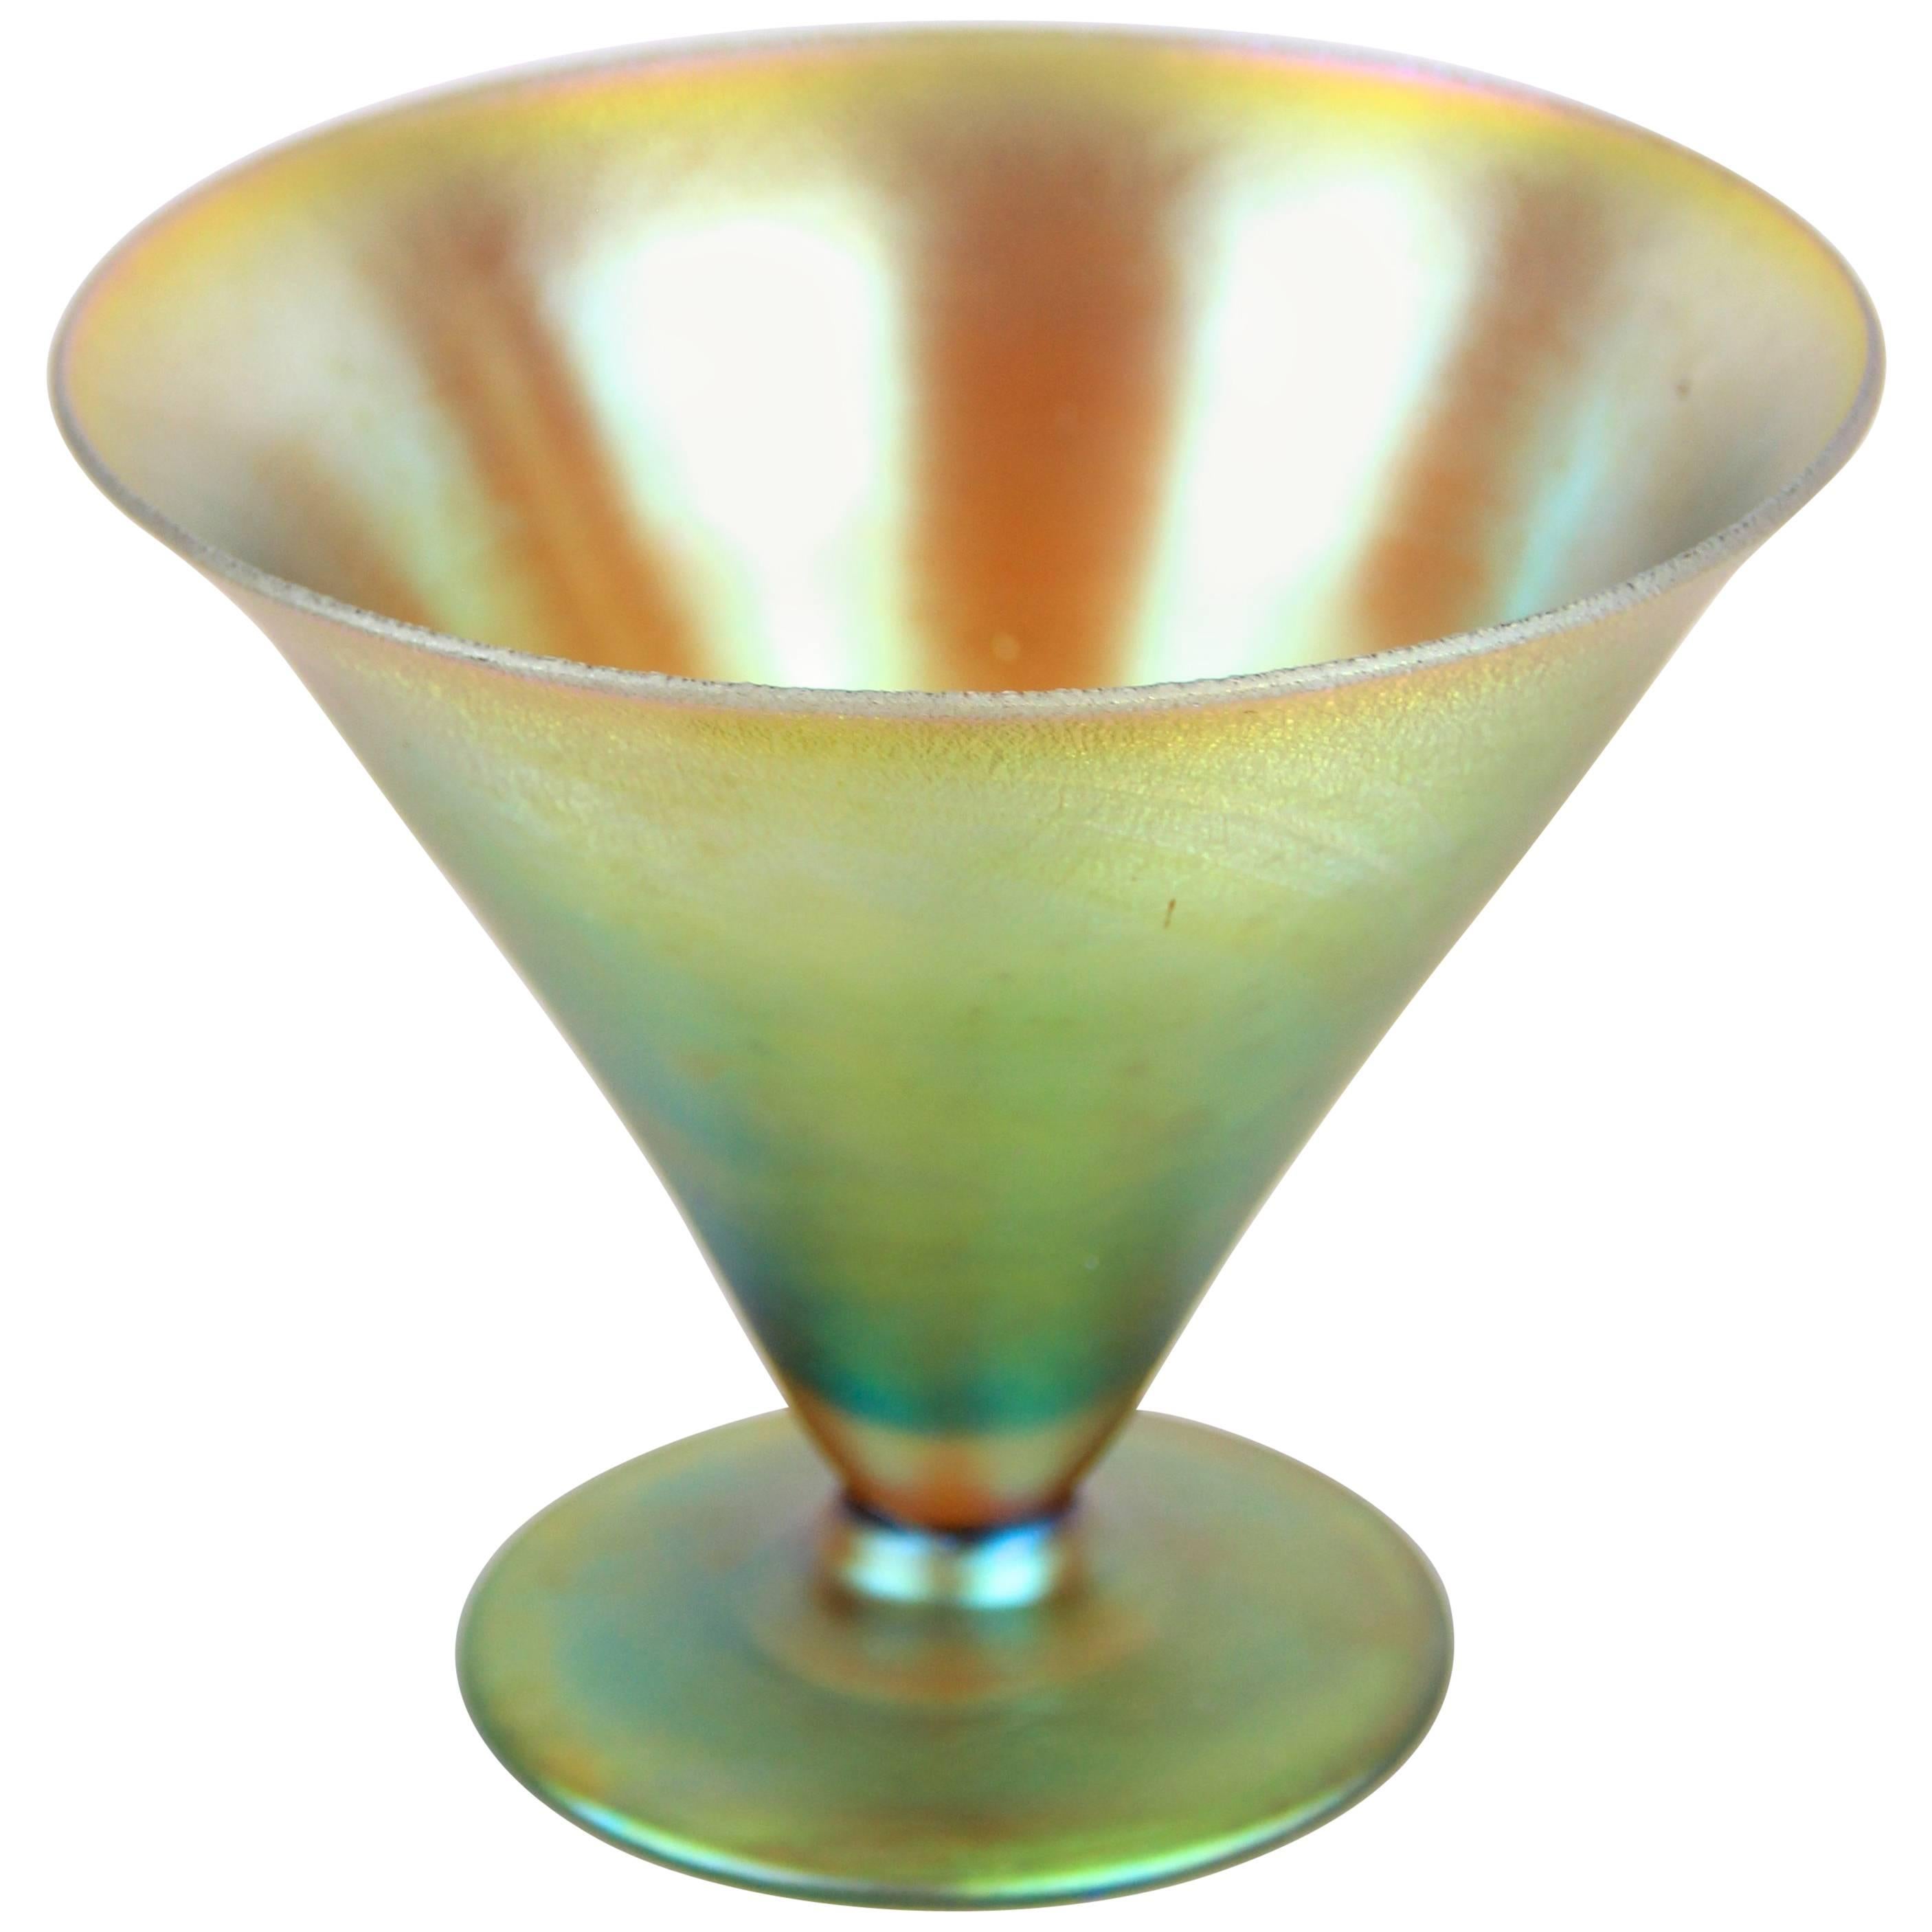 Art Deco Iridescent Glass Goblet by WMF, Germany, circa 1925